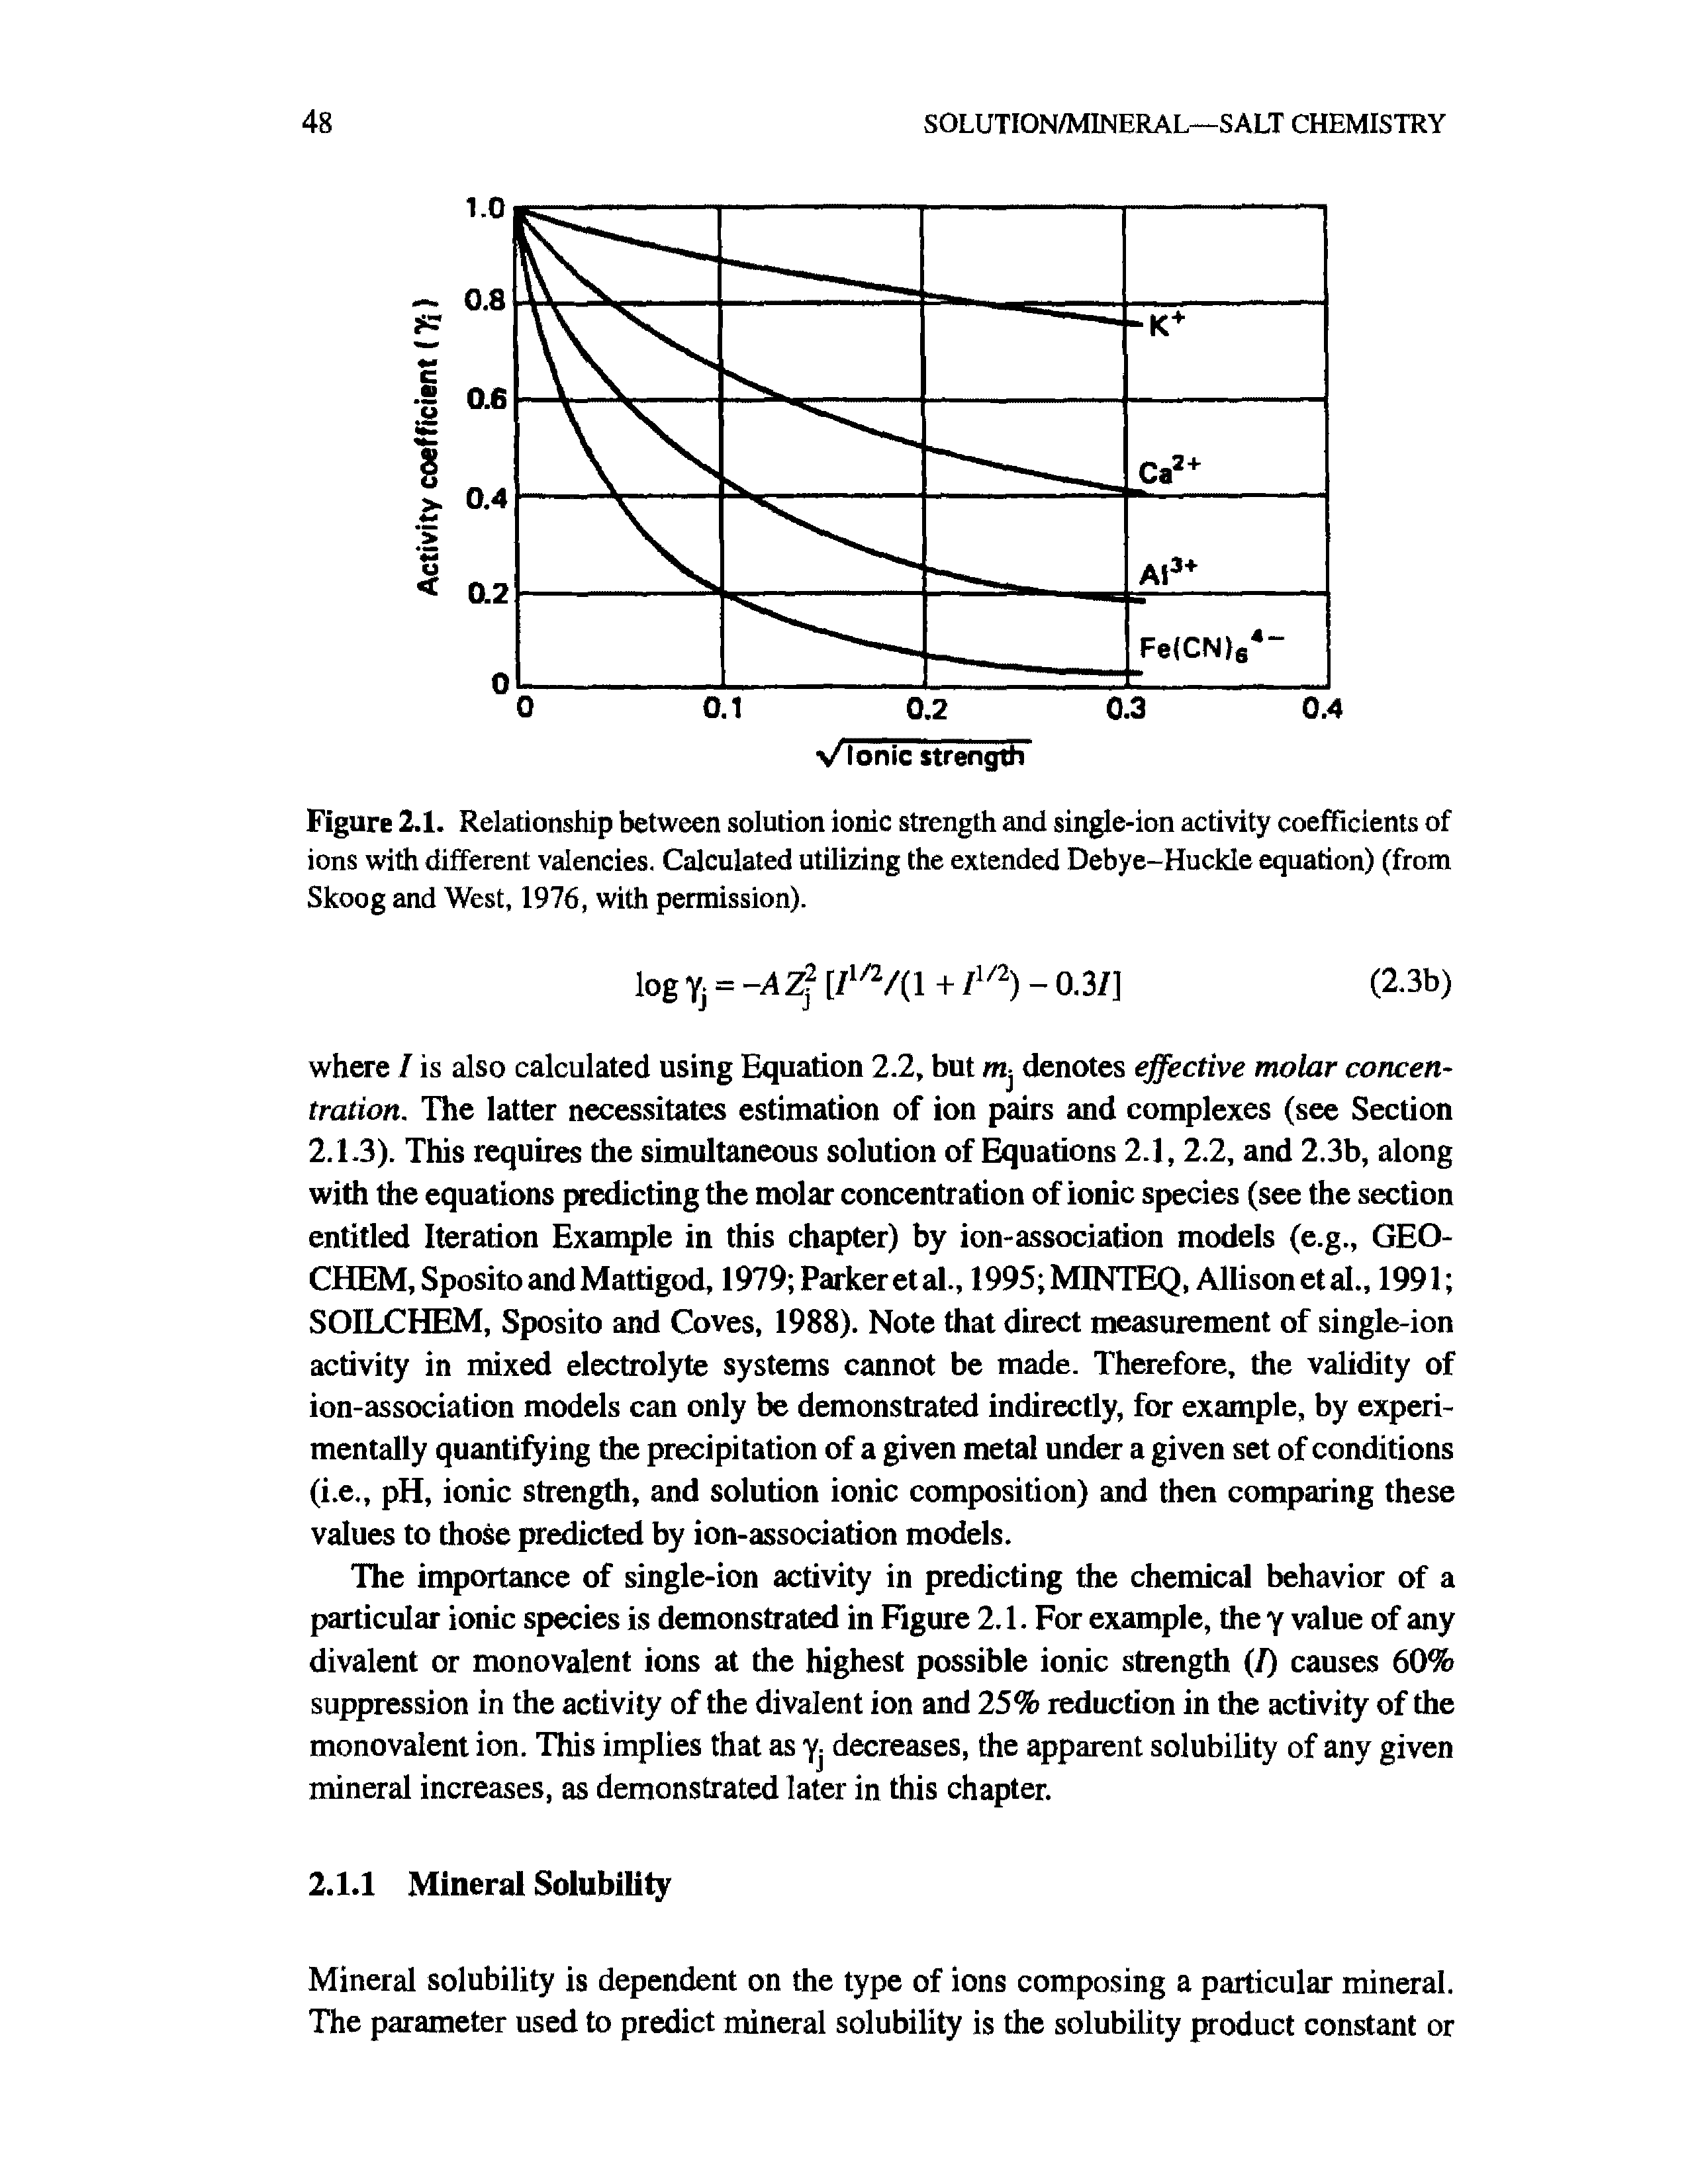 Figure 2.1. Relationship between solution ionic strength and single-ion activity coefficients of ions with different valencies. Calculated utilizing the extended Debye-Huckle equation) (from Skoog and West, 1976, with permission).